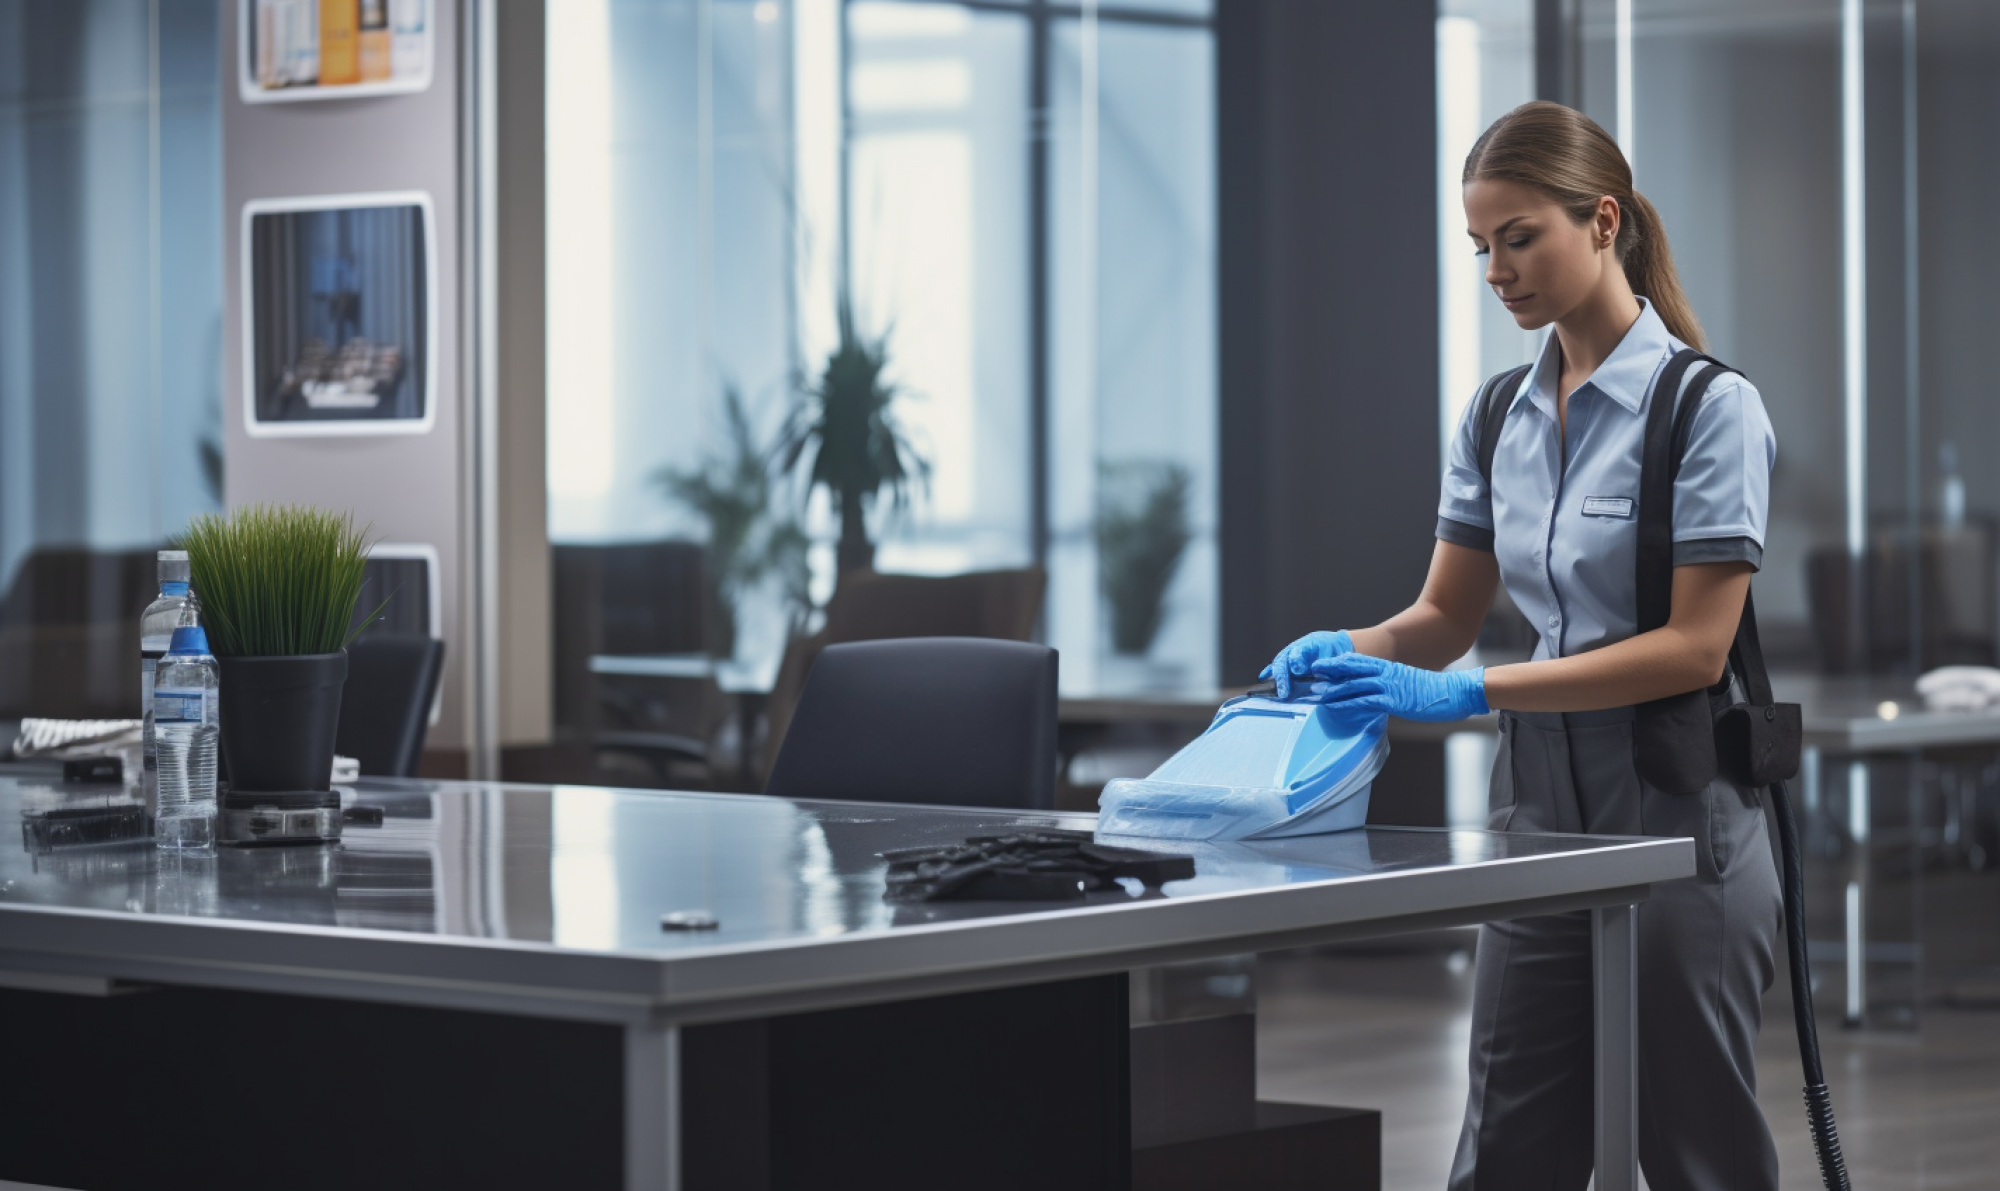 Women Janitor Clean And Disinfect Teleconference Equipment